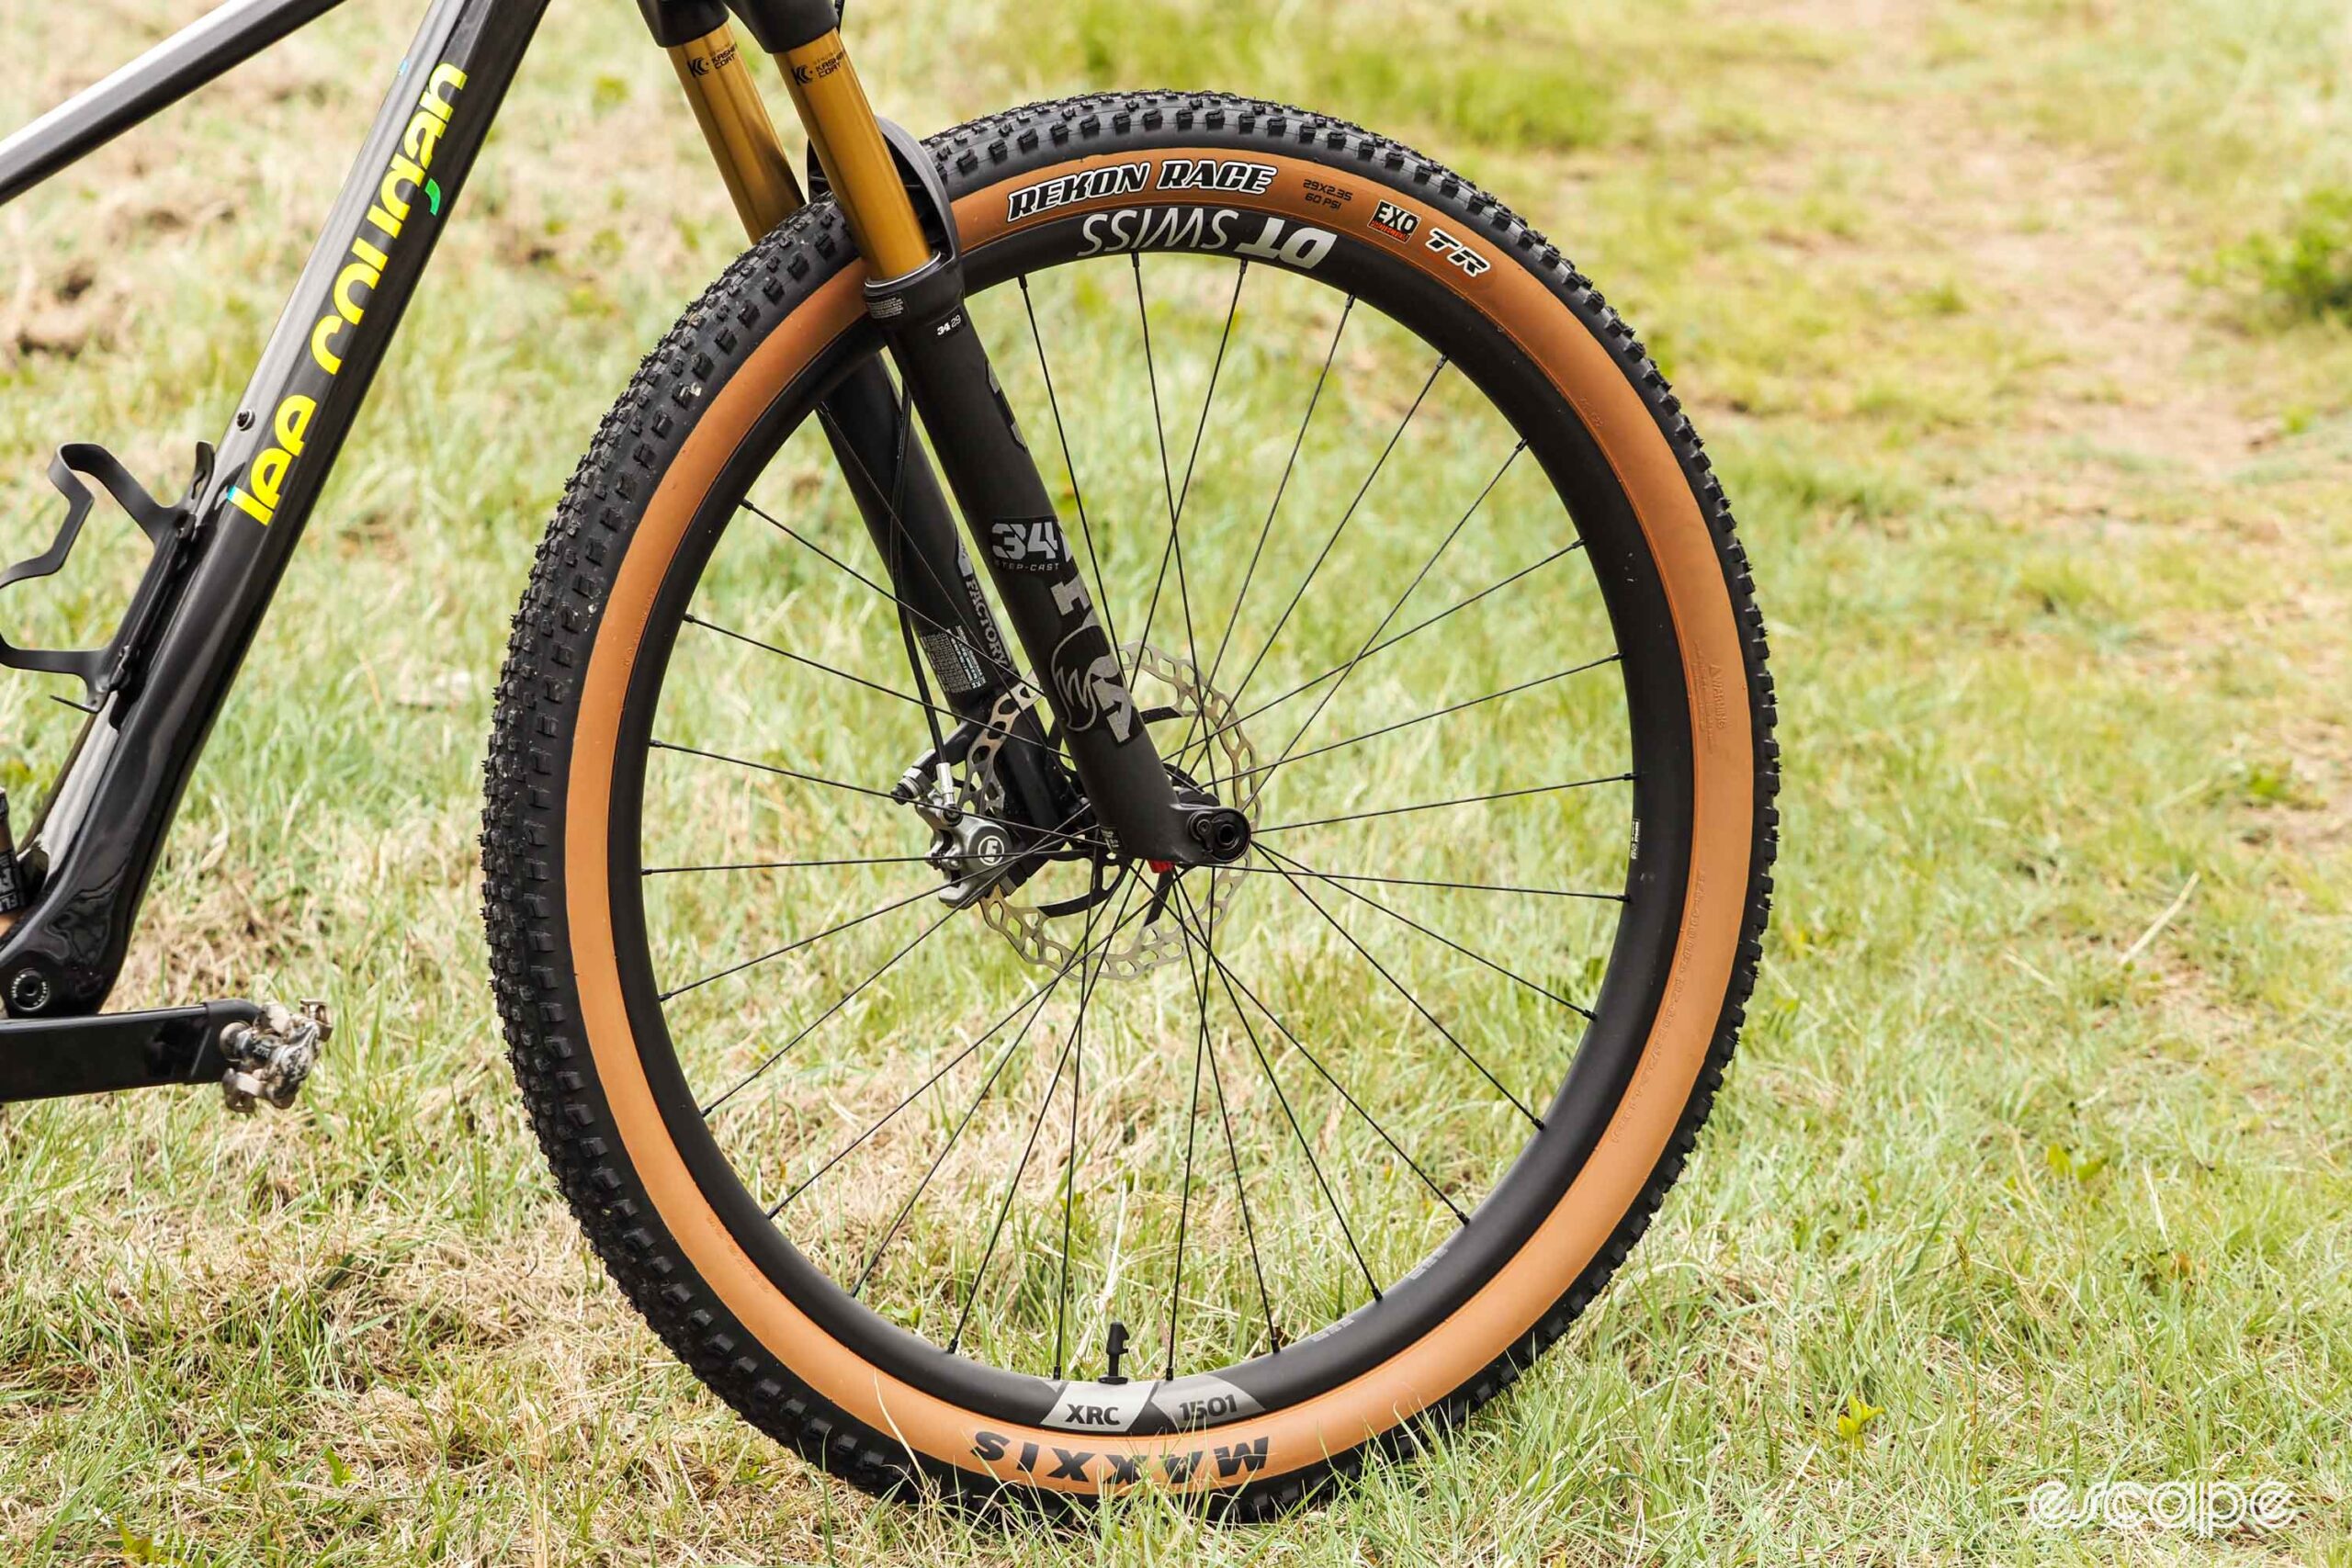 Lee Cougan Crossfire Trail DT Swiss front wheel